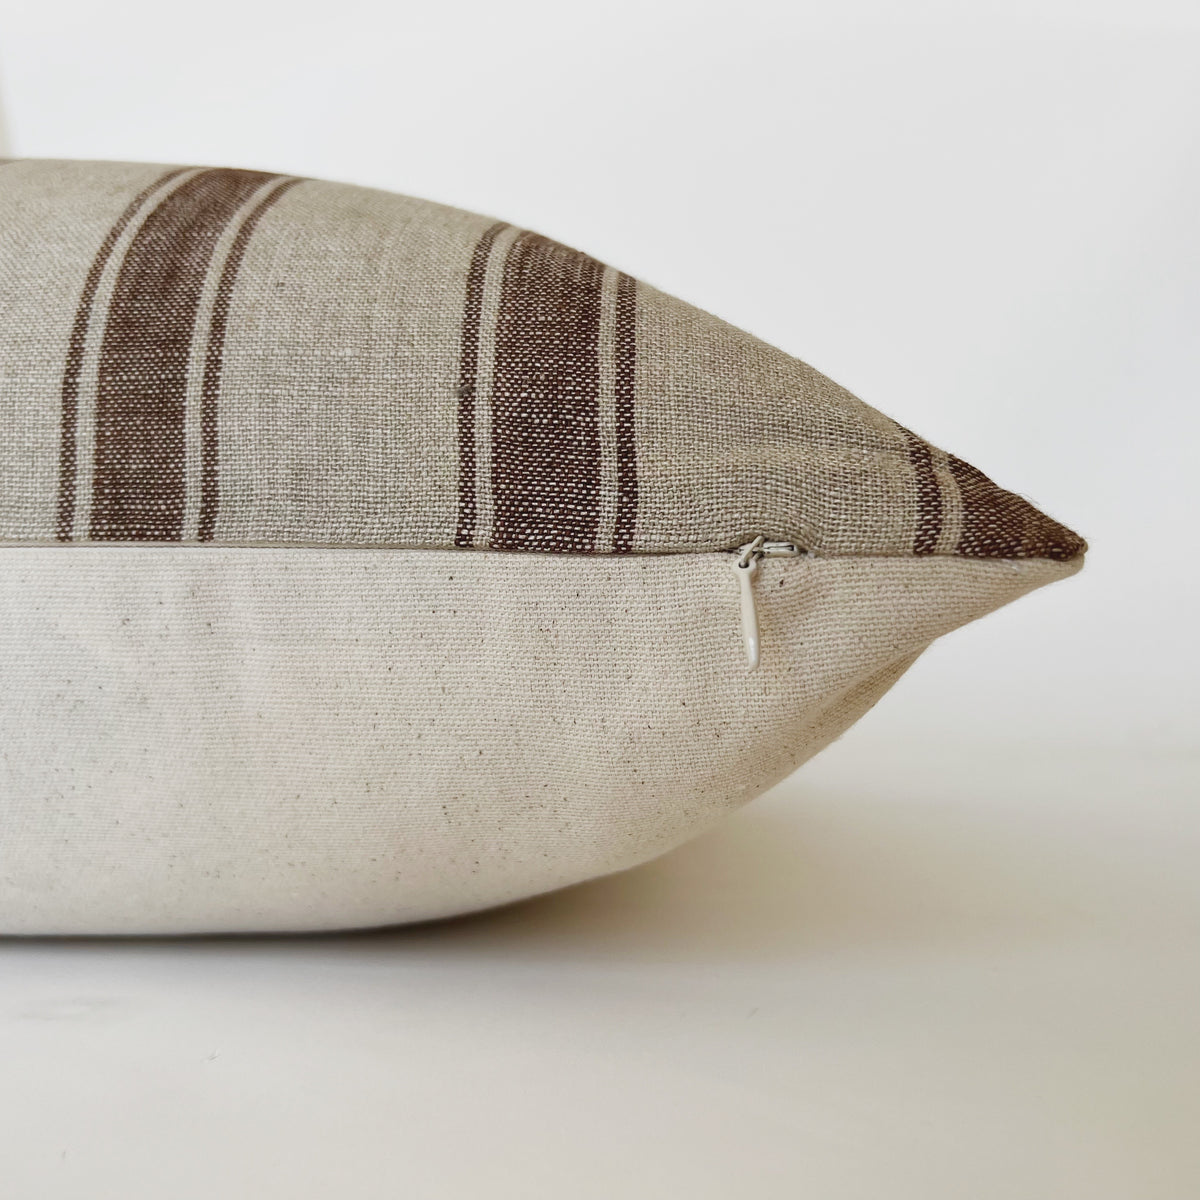 Rust and Beige Striped Pillow Cover